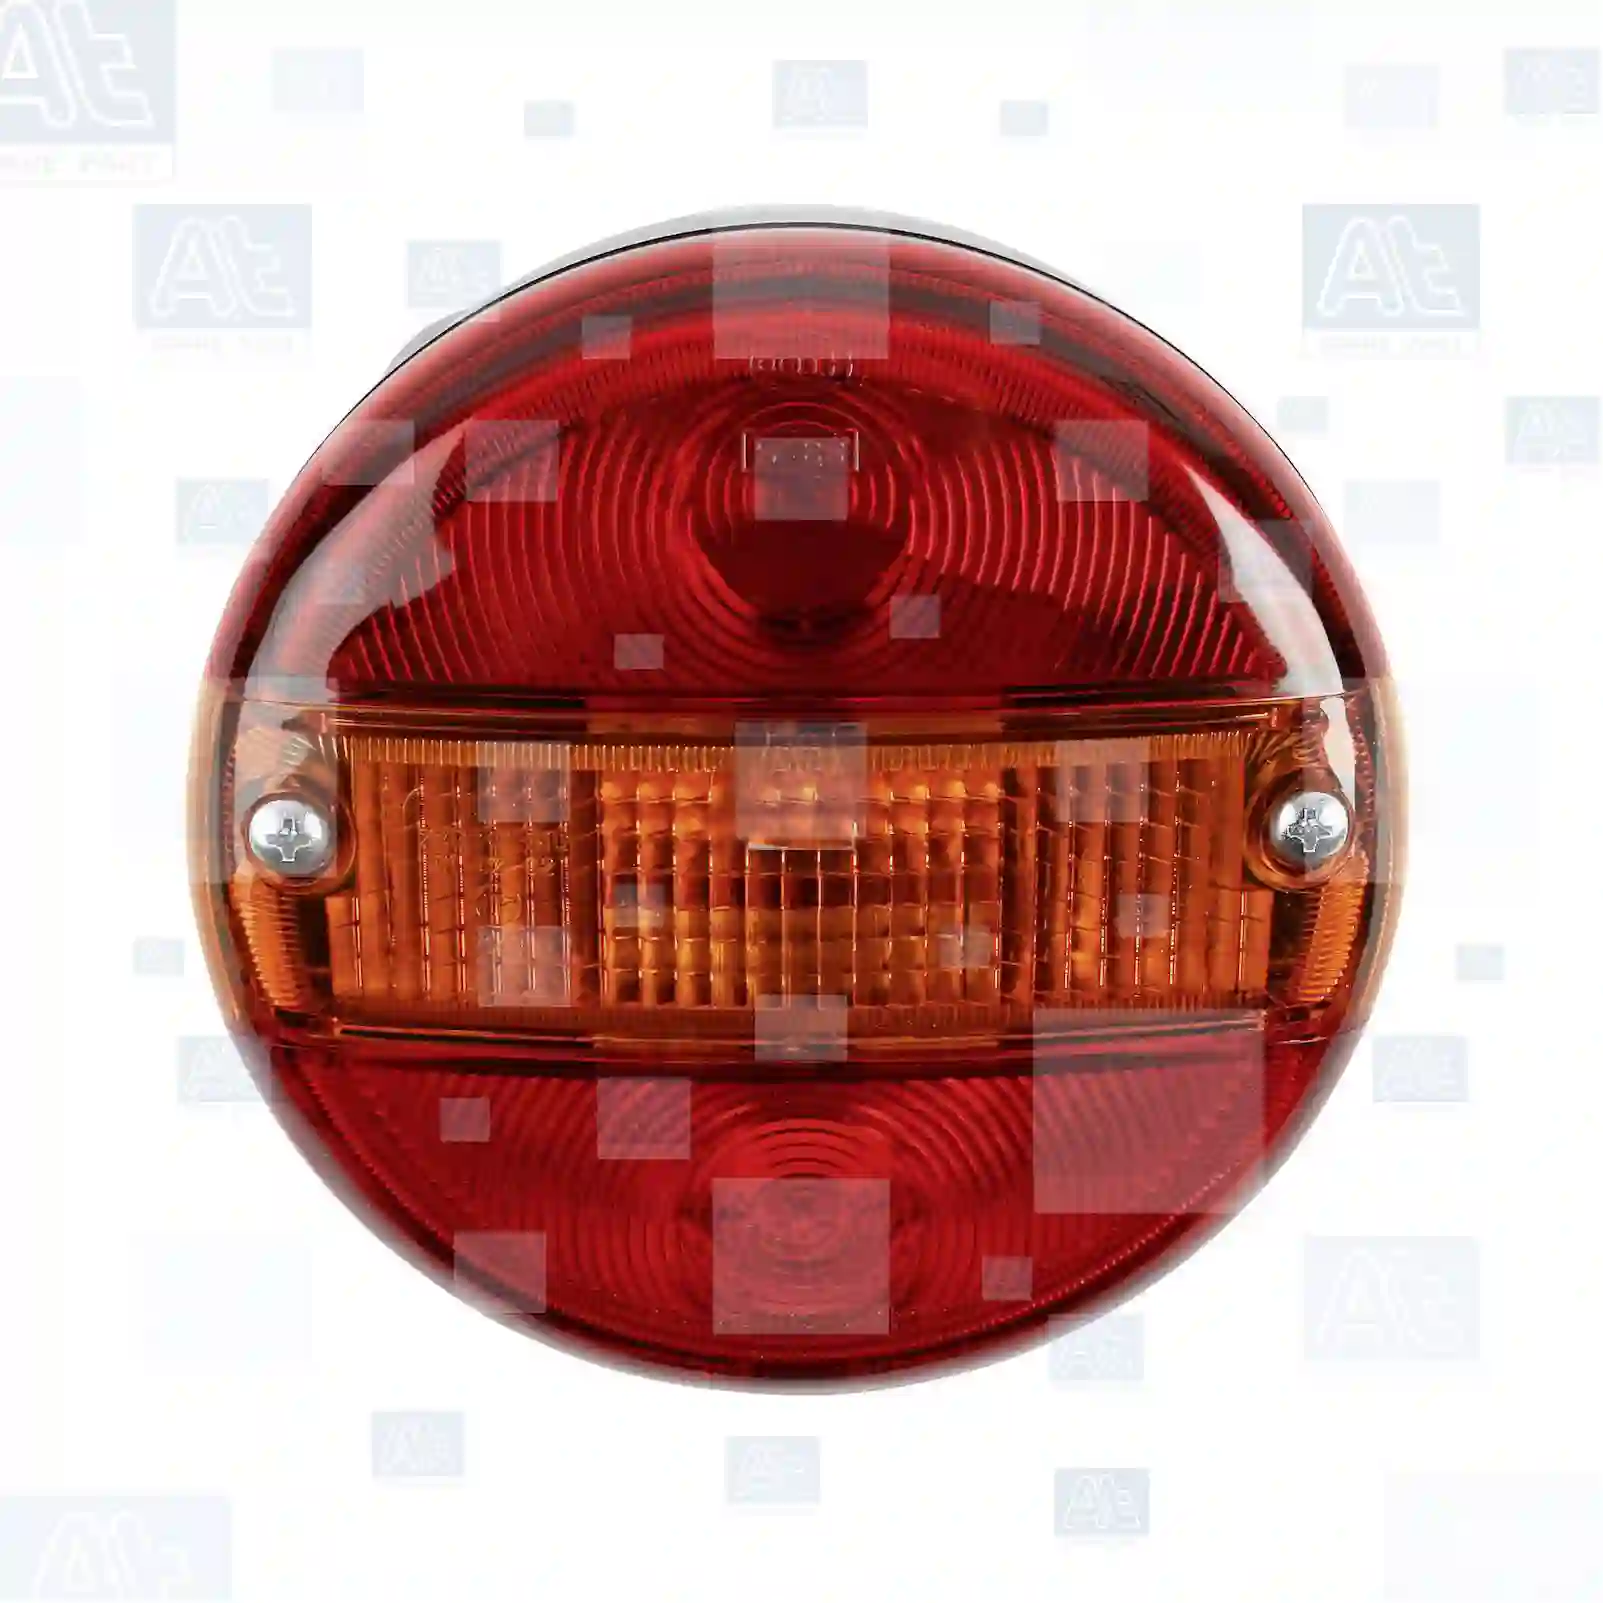 Tail lamp, with license plate lamp, 77710846, 0563047, 0867488, 1283168, 563047, 691624, 867488, 8176148, 8176149, 1710294, 8475135, 99707751917, 42024986, LSX0436888, 41200525, 42024986, 99446124, 16518023, 24390, 4001004, 75079, 77897, 5800123, 58001230, 5803642, 58036420, 607106601, 81252256067, 81252256403, 82000045492, 90816159136, 0015442203, 0015446403, 1912002, 241227, 060515, 7526120000, 1873010277, 348750, 363716 ||  77710846 At Spare Part | Engine, Accelerator Pedal, Camshaft, Connecting Rod, Crankcase, Crankshaft, Cylinder Head, Engine Suspension Mountings, Exhaust Manifold, Exhaust Gas Recirculation, Filter Kits, Flywheel Housing, General Overhaul Kits, Engine, Intake Manifold, Oil Cleaner, Oil Cooler, Oil Filter, Oil Pump, Oil Sump, Piston & Liner, Sensor & Switch, Timing Case, Turbocharger, Cooling System, Belt Tensioner, Coolant Filter, Coolant Pipe, Corrosion Prevention Agent, Drive, Expansion Tank, Fan, Intercooler, Monitors & Gauges, Radiator, Thermostat, V-Belt / Timing belt, Water Pump, Fuel System, Electronical Injector Unit, Feed Pump, Fuel Filter, cpl., Fuel Gauge Sender,  Fuel Line, Fuel Pump, Fuel Tank, Injection Line Kit, Injection Pump, Exhaust System, Clutch & Pedal, Gearbox, Propeller Shaft, Axles, Brake System, Hubs & Wheels, Suspension, Leaf Spring, Universal Parts / Accessories, Steering, Electrical System, Cabin Tail lamp, with license plate lamp, 77710846, 0563047, 0867488, 1283168, 563047, 691624, 867488, 8176148, 8176149, 1710294, 8475135, 99707751917, 42024986, LSX0436888, 41200525, 42024986, 99446124, 16518023, 24390, 4001004, 75079, 77897, 5800123, 58001230, 5803642, 58036420, 607106601, 81252256067, 81252256403, 82000045492, 90816159136, 0015442203, 0015446403, 1912002, 241227, 060515, 7526120000, 1873010277, 348750, 363716 ||  77710846 At Spare Part | Engine, Accelerator Pedal, Camshaft, Connecting Rod, Crankcase, Crankshaft, Cylinder Head, Engine Suspension Mountings, Exhaust Manifold, Exhaust Gas Recirculation, Filter Kits, Flywheel Housing, General Overhaul Kits, Engine, Intake Manifold, Oil Cleaner, Oil Cooler, Oil Filter, Oil Pump, Oil Sump, Piston & Liner, Sensor & Switch, Timing Case, Turbocharger, Cooling System, Belt Tensioner, Coolant Filter, Coolant Pipe, Corrosion Prevention Agent, Drive, Expansion Tank, Fan, Intercooler, Monitors & Gauges, Radiator, Thermostat, V-Belt / Timing belt, Water Pump, Fuel System, Electronical Injector Unit, Feed Pump, Fuel Filter, cpl., Fuel Gauge Sender,  Fuel Line, Fuel Pump, Fuel Tank, Injection Line Kit, Injection Pump, Exhaust System, Clutch & Pedal, Gearbox, Propeller Shaft, Axles, Brake System, Hubs & Wheels, Suspension, Leaf Spring, Universal Parts / Accessories, Steering, Electrical System, Cabin